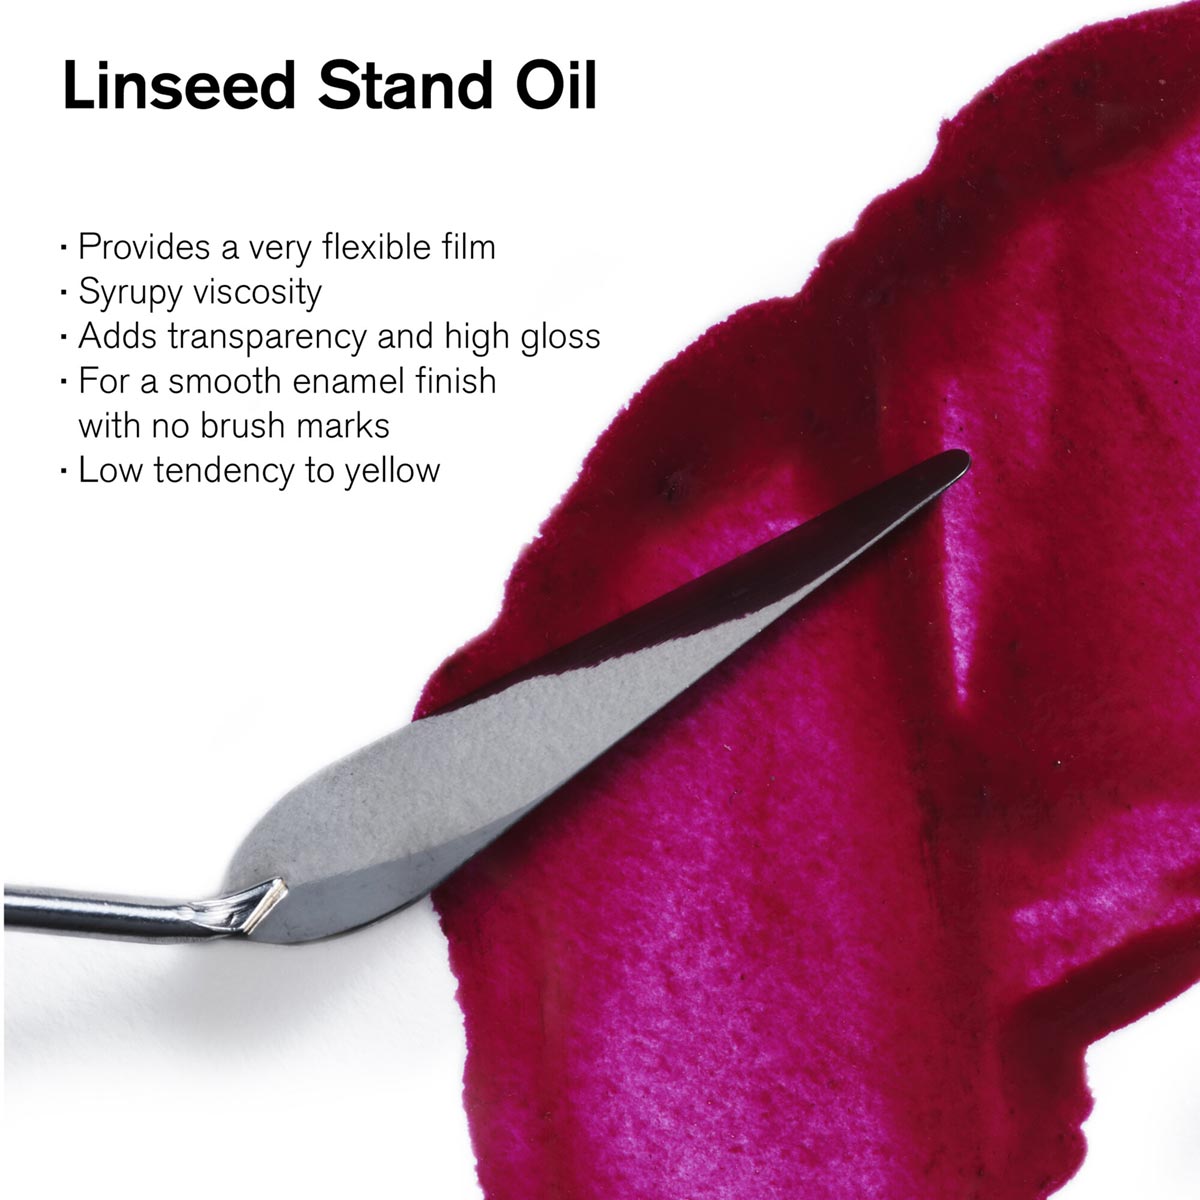 Winsor and Newton - Stand Oil (Linseed) - 75ml -